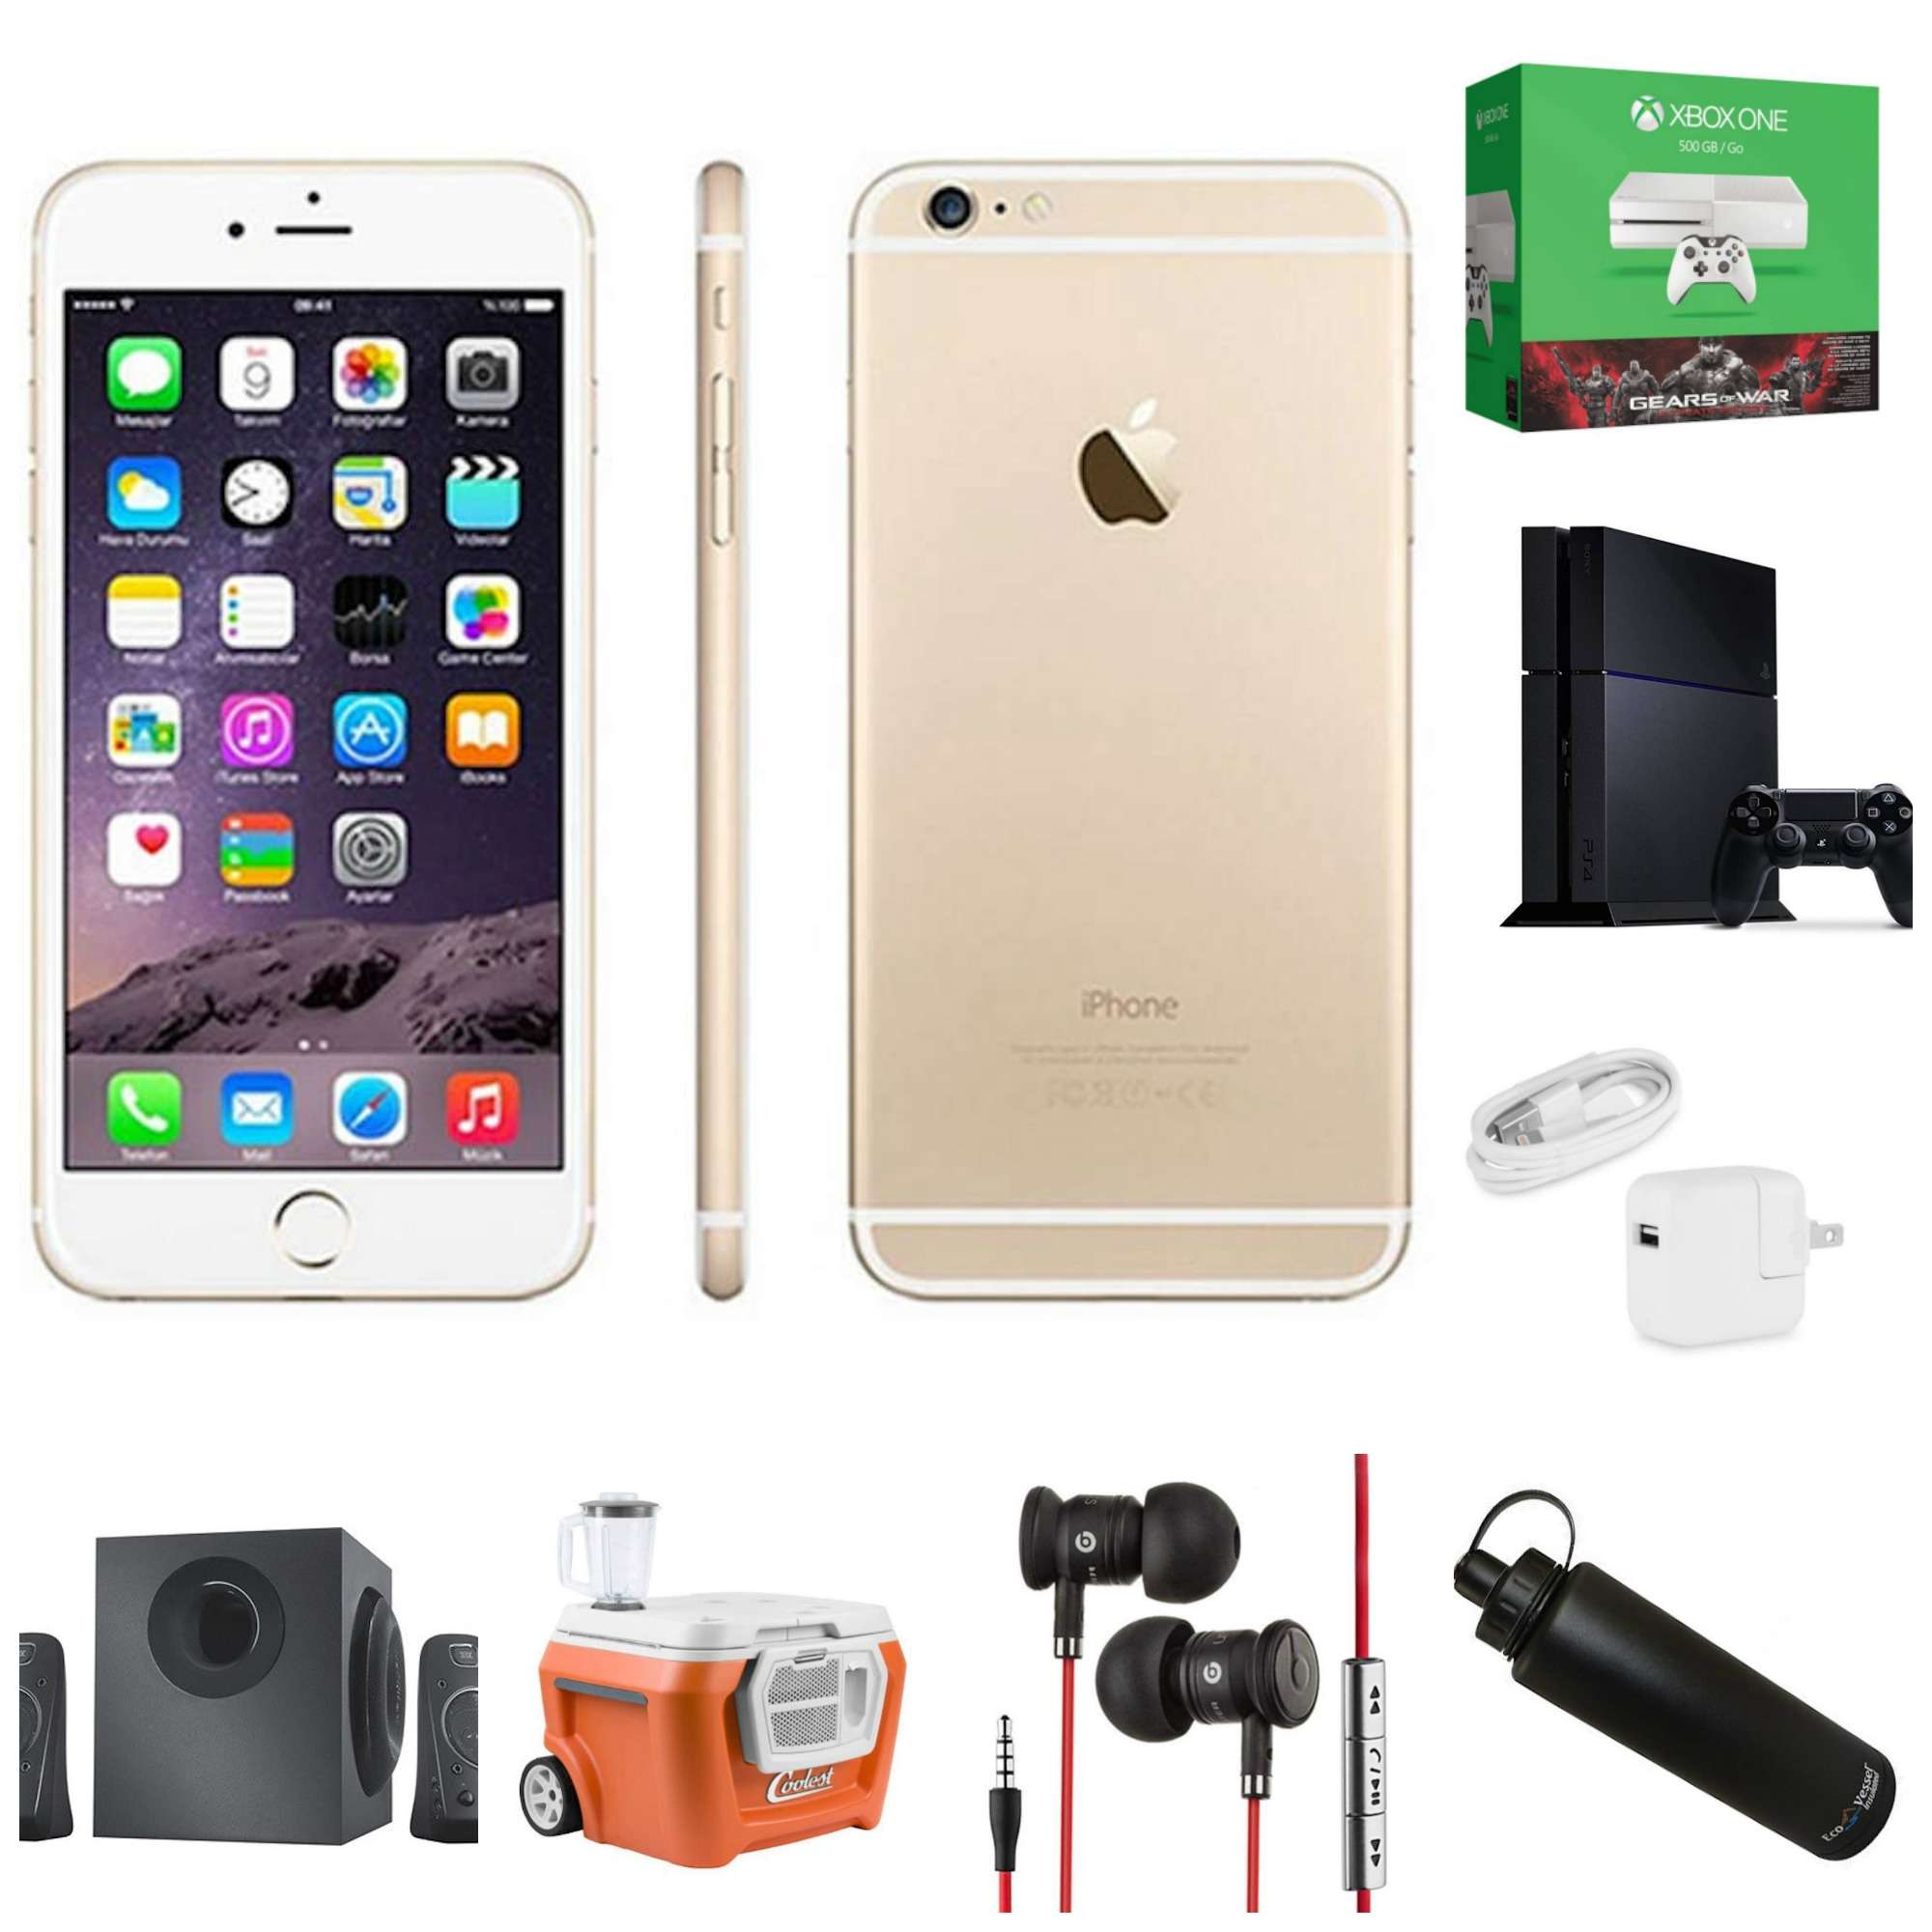 You'll find deals on iPhone 6 and 6 Plus, Beats by Dre urBeats earbuds, Xbox One and more in this week's roundup.